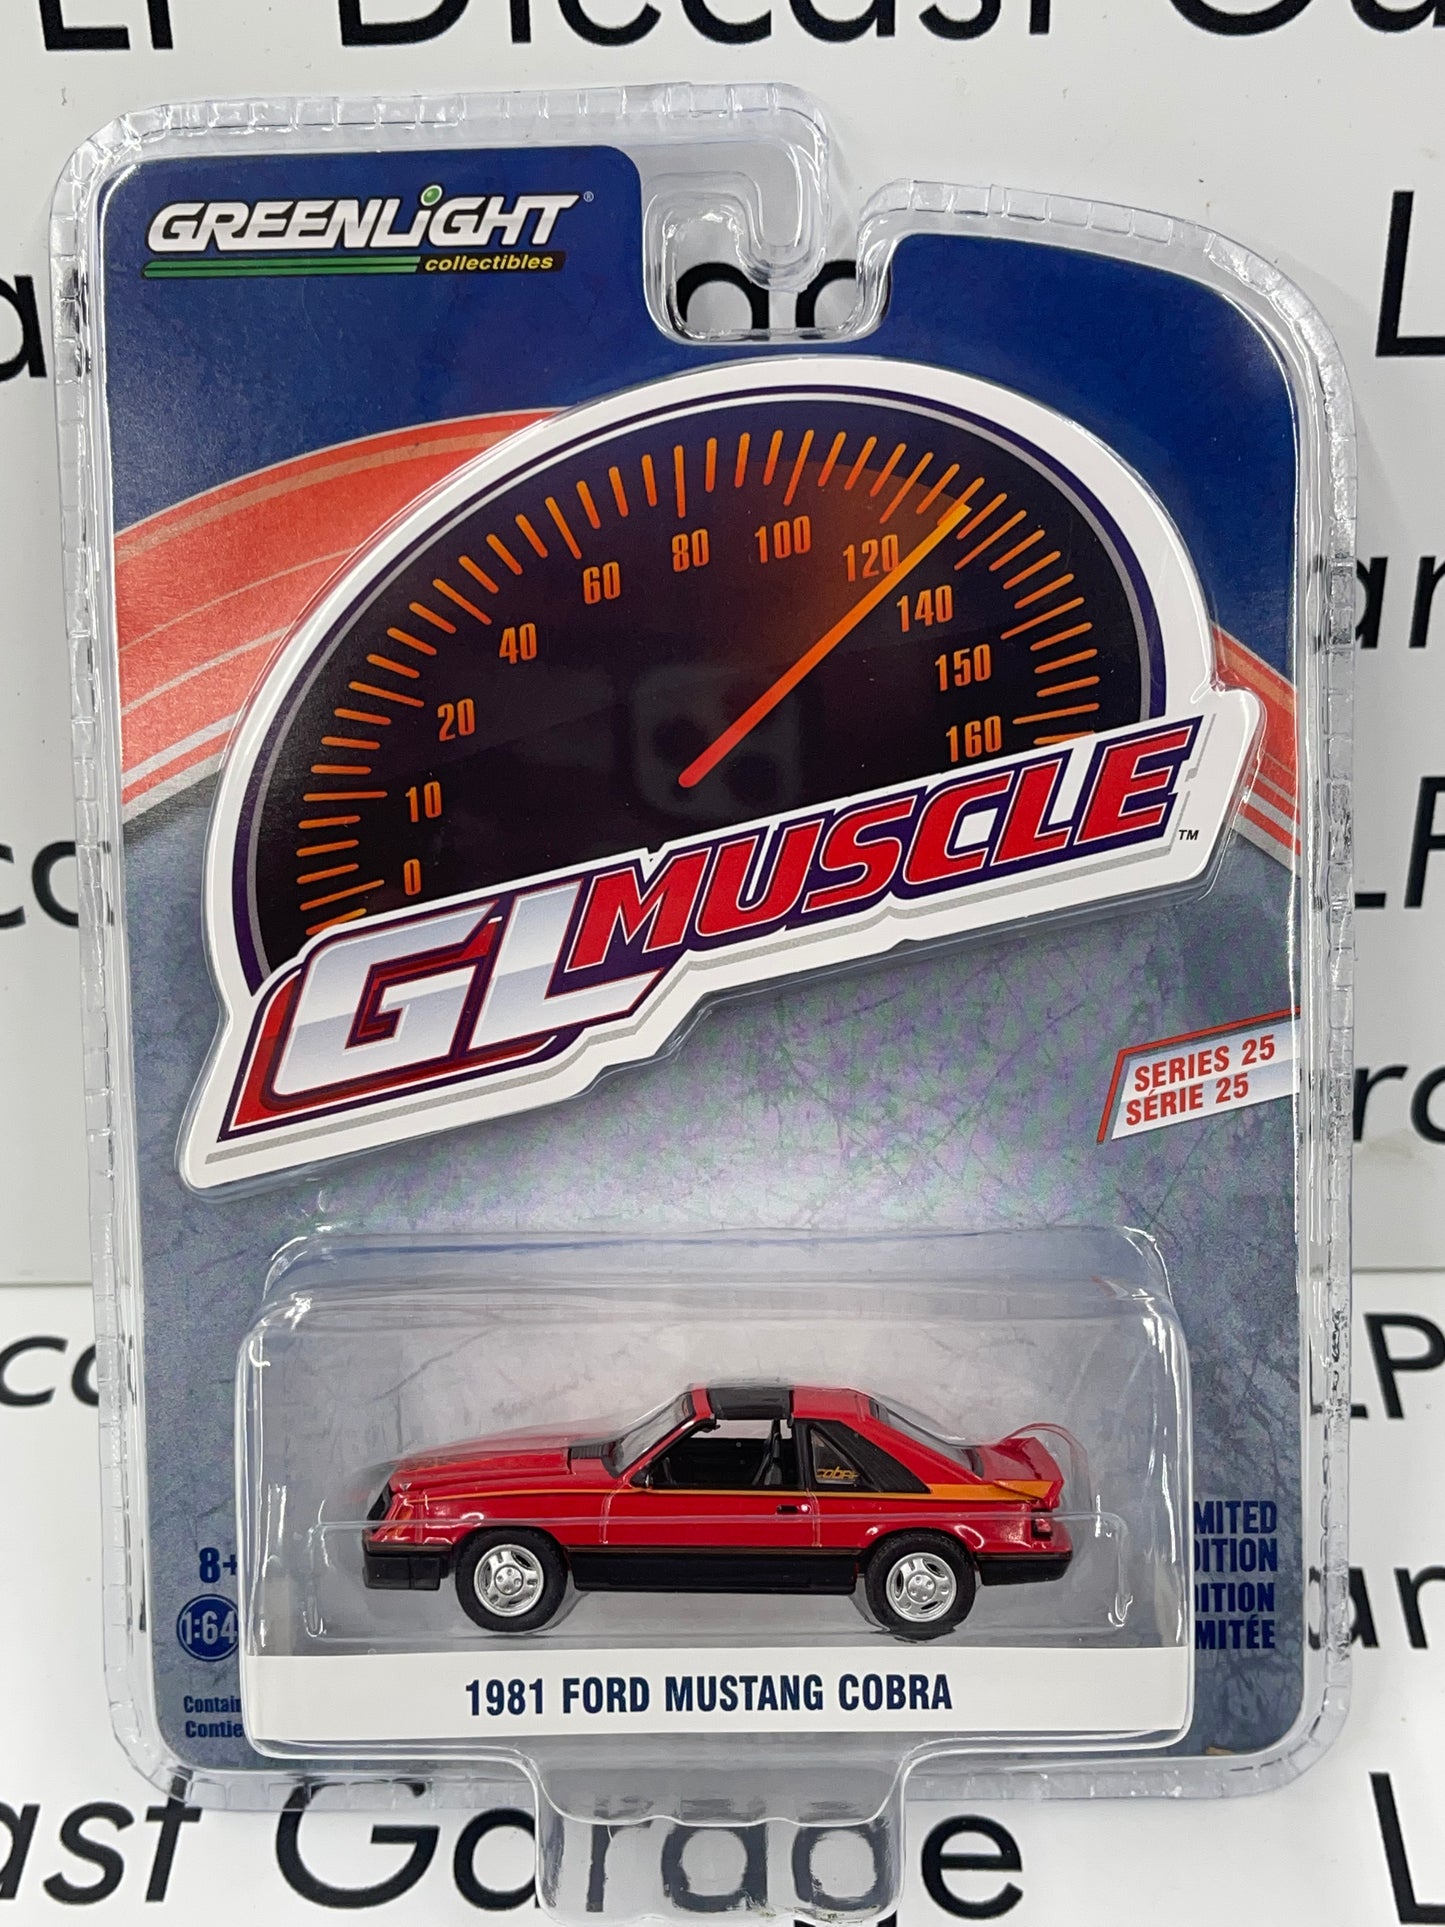 GREENLIGHT 1981 Ford Mustang Cobra Bright Red GL Muscle Series 1:64 Diecast